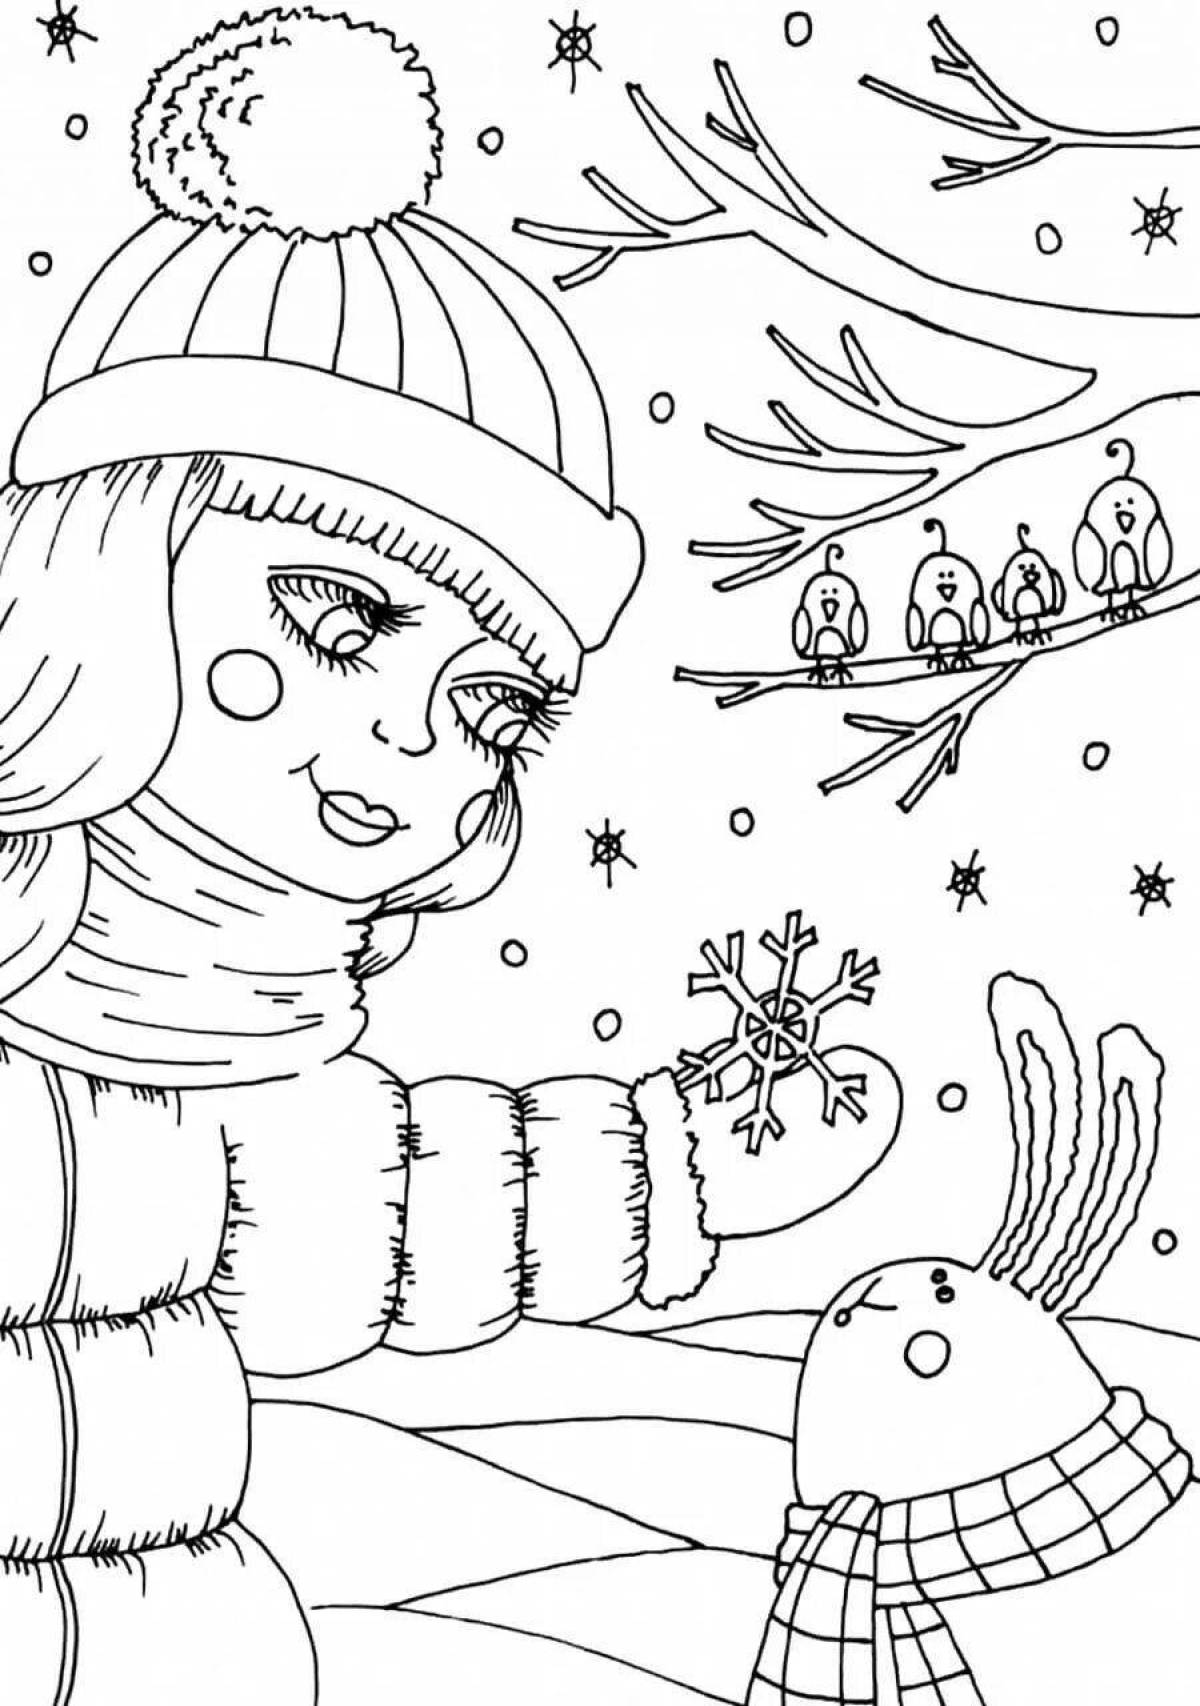 Whimsical winter fantasy coloring book